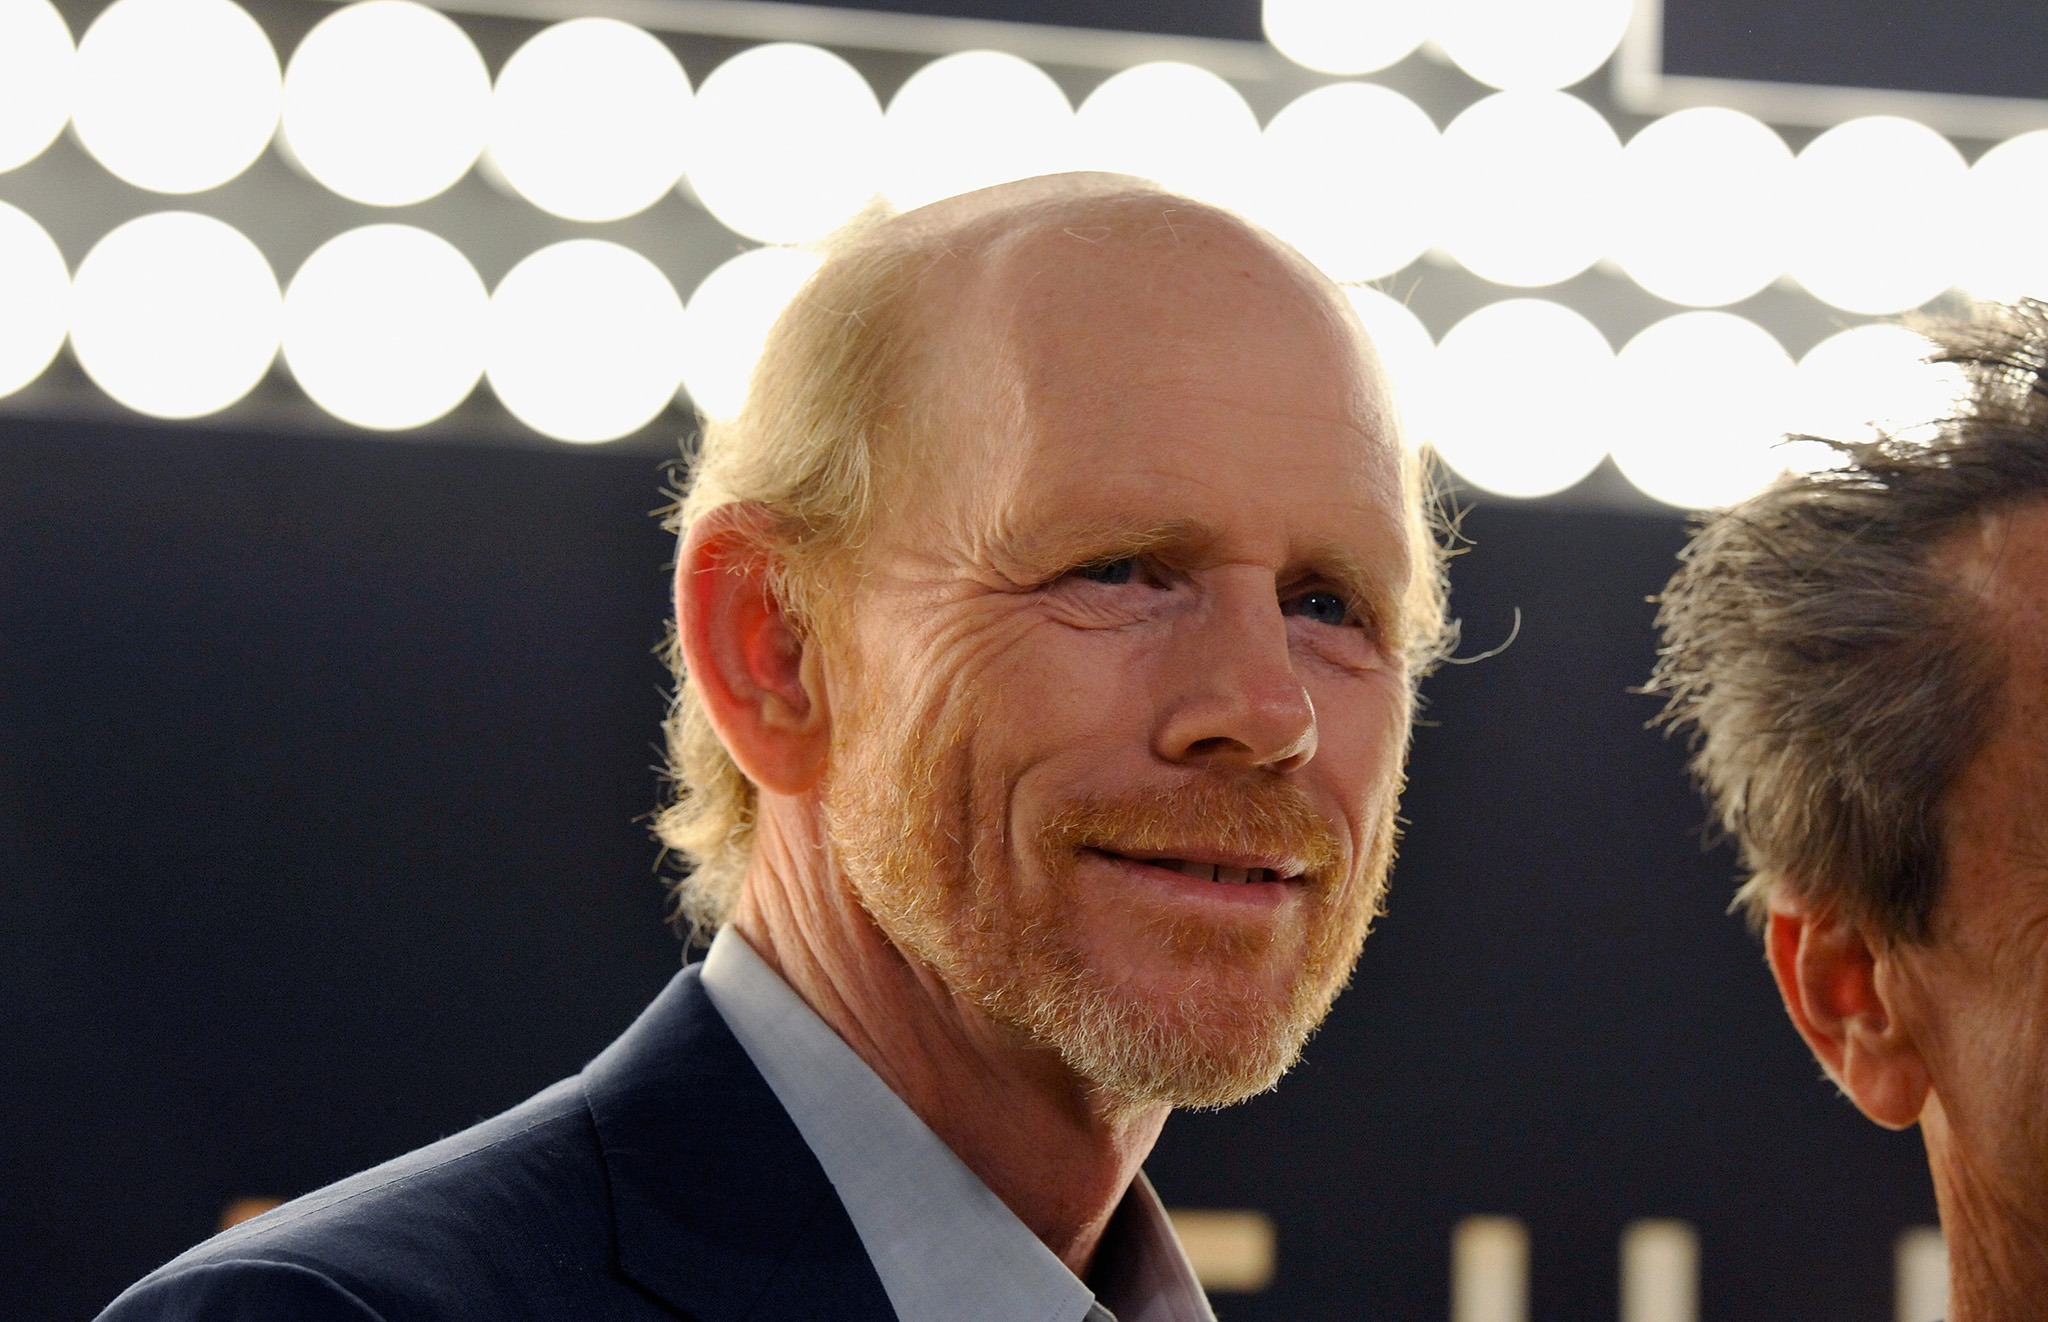 WEST HOLLYWOOD, CA - OCTOBER 26: Executive Producer Ron Howard attends the premiere of National Geographic Channel and GE's "Breakthrough" at Pacific Design Center on October 26, 2015 in West Hollywood, California.  (Photo by Michael Tullberg/Getty Images)